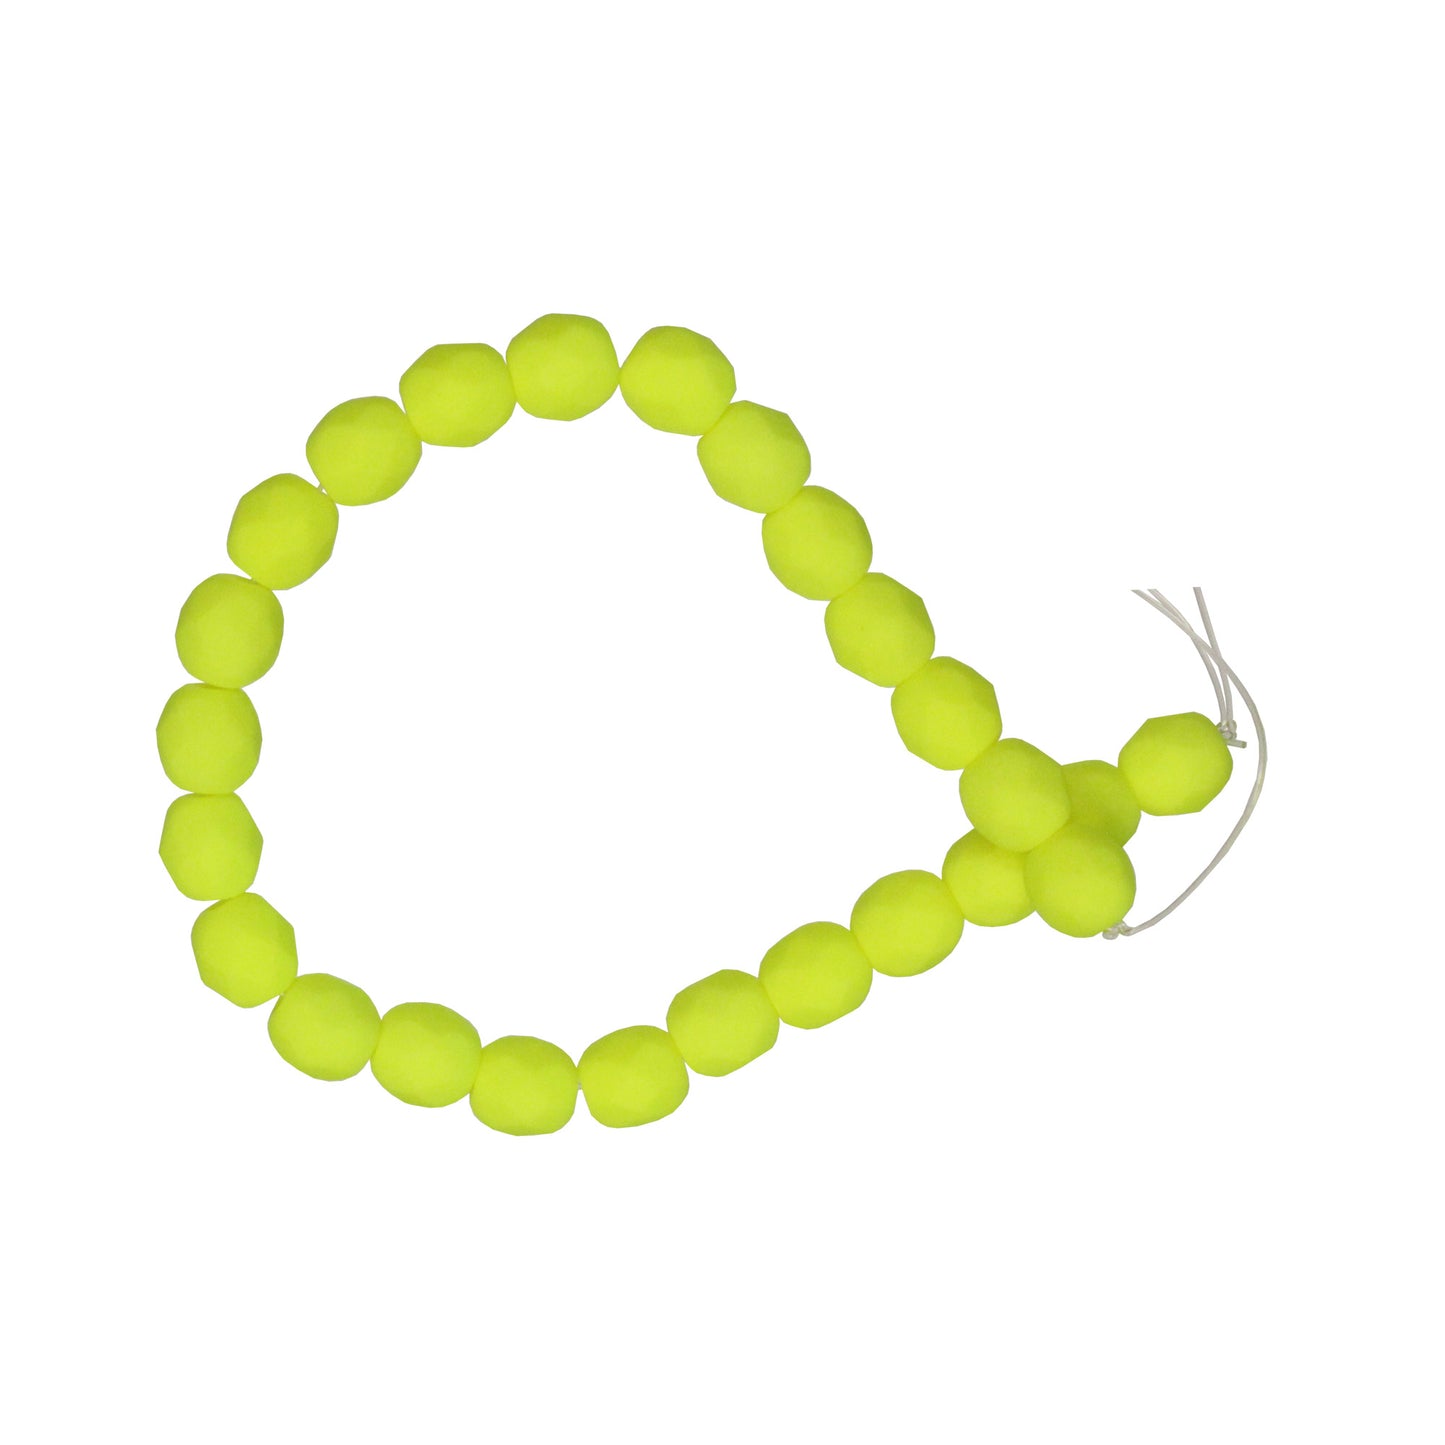 6mm Neon Yellow Beads / 25 bead strand / faceted round fire polished glass